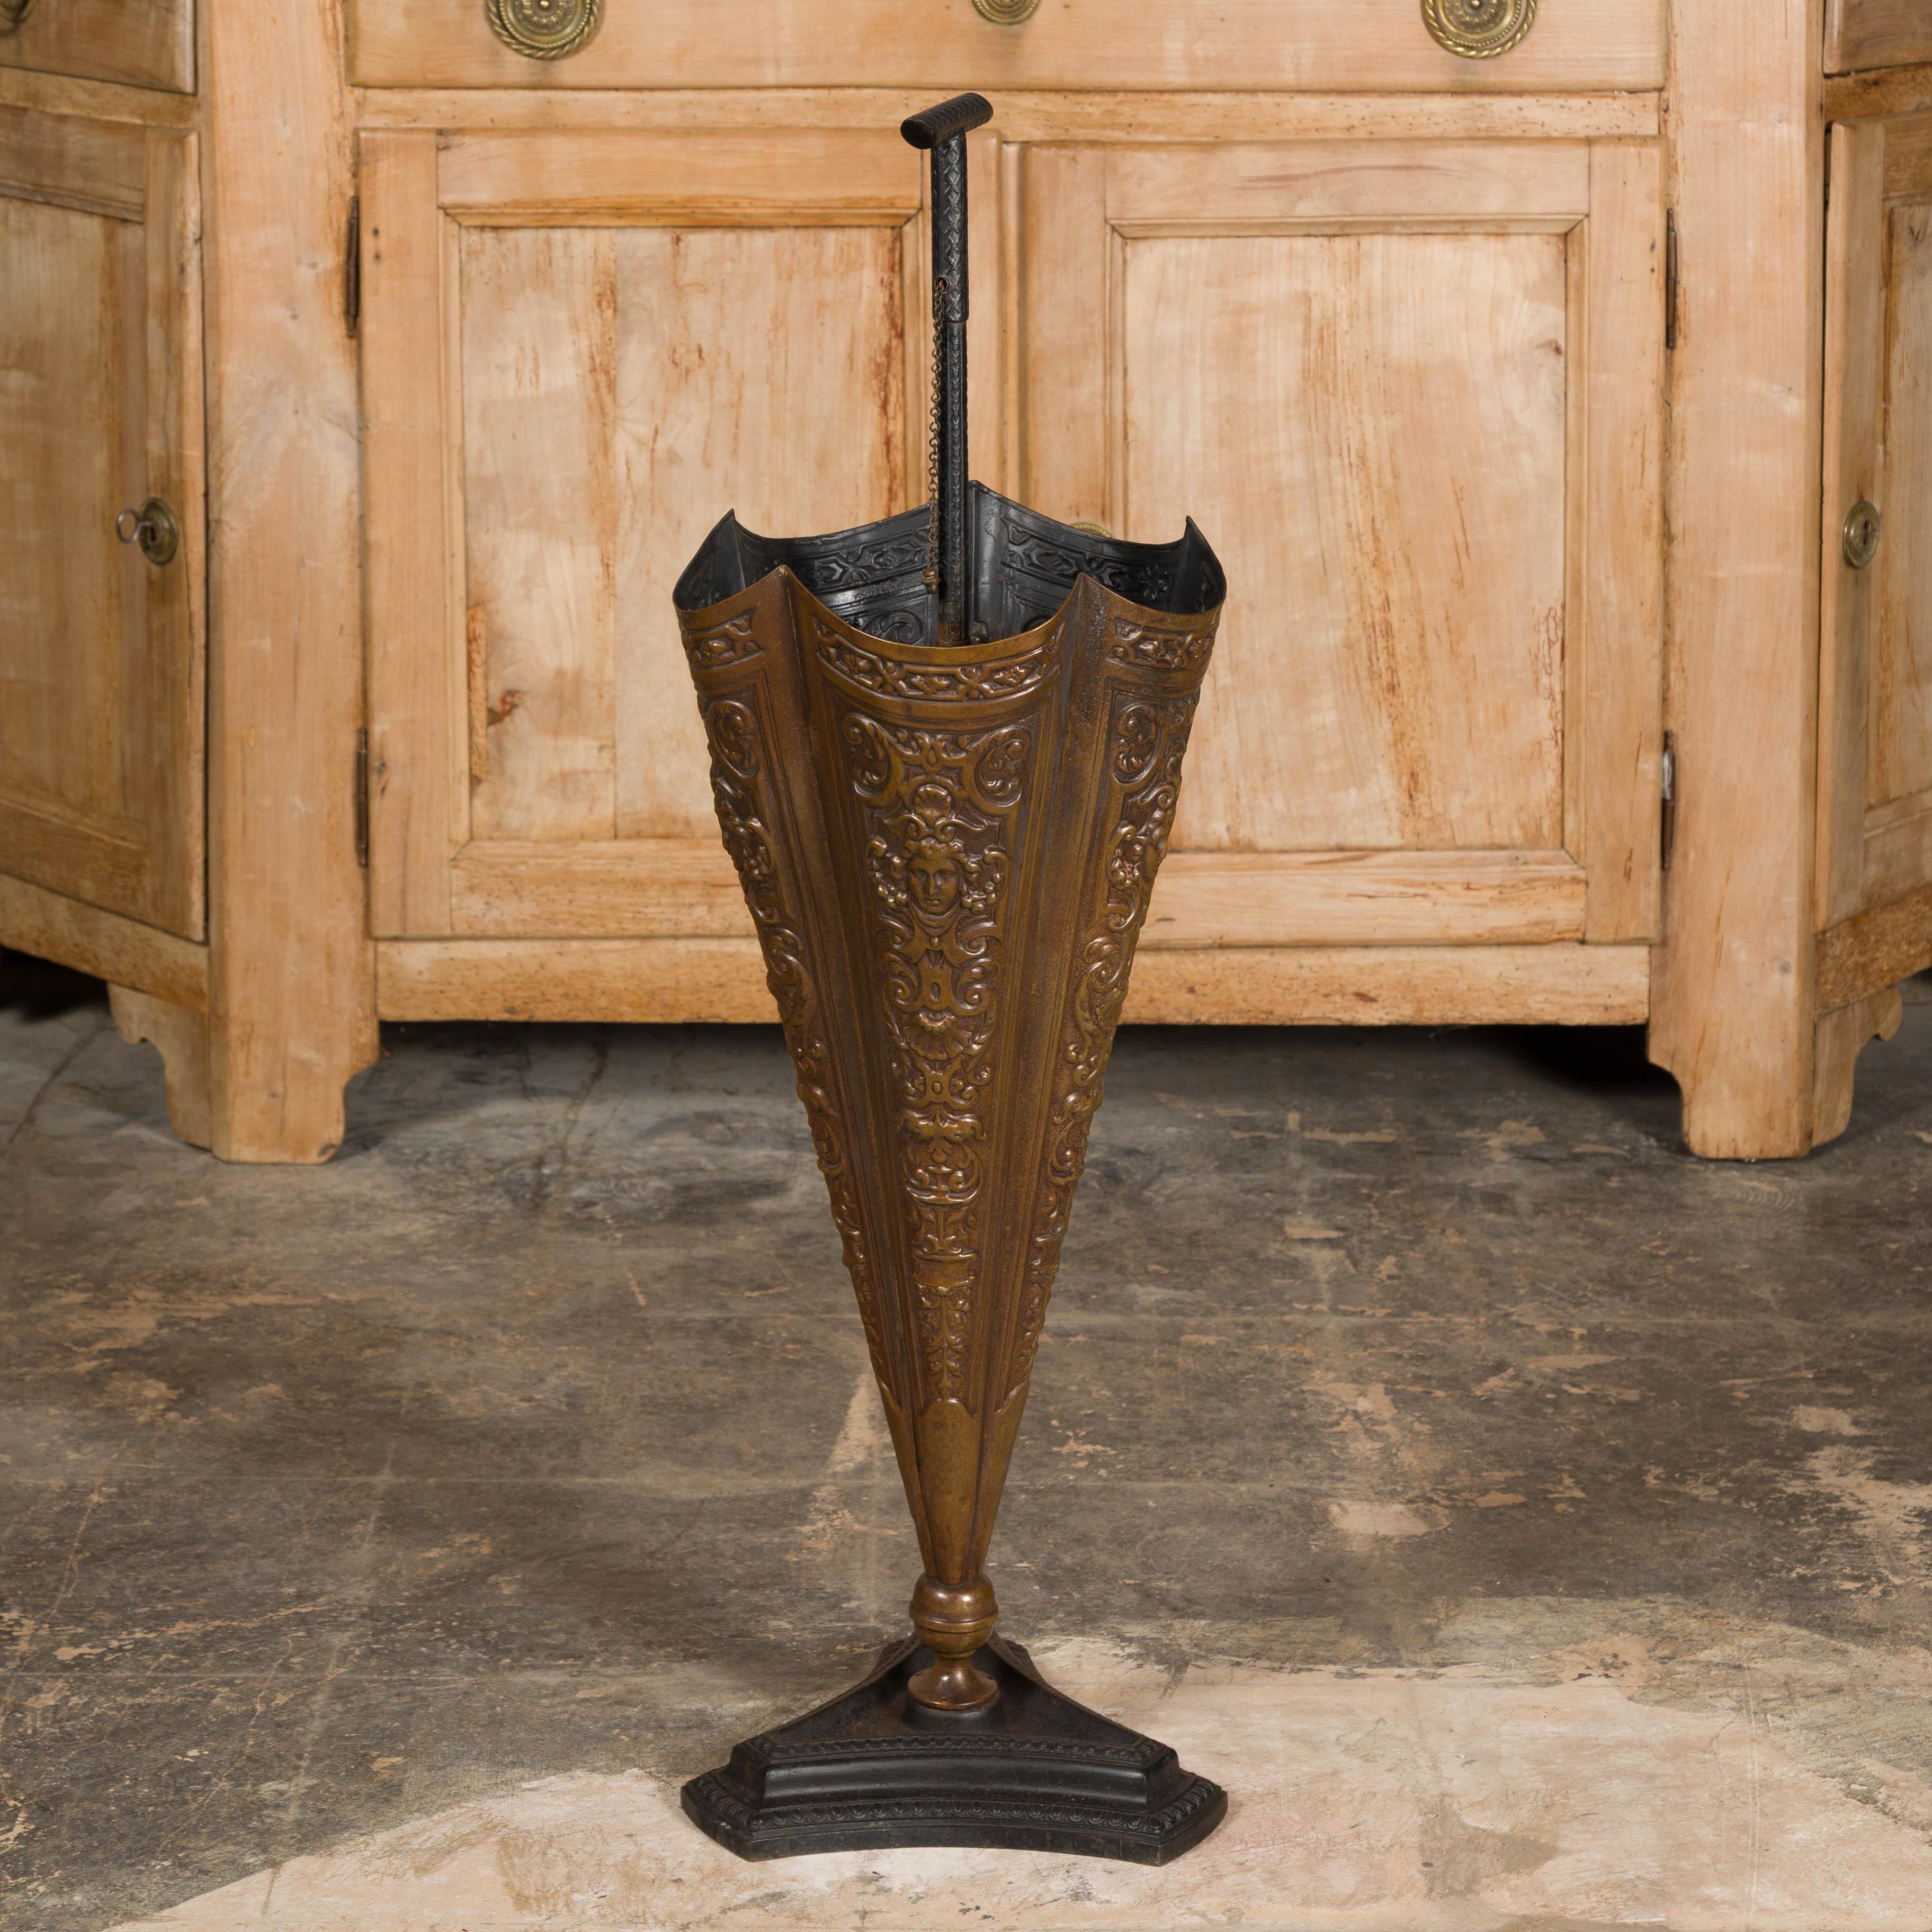 English 1920-1930 Brass Umbrella Stand with Raised Motifs and Tripartite Base For Sale 7